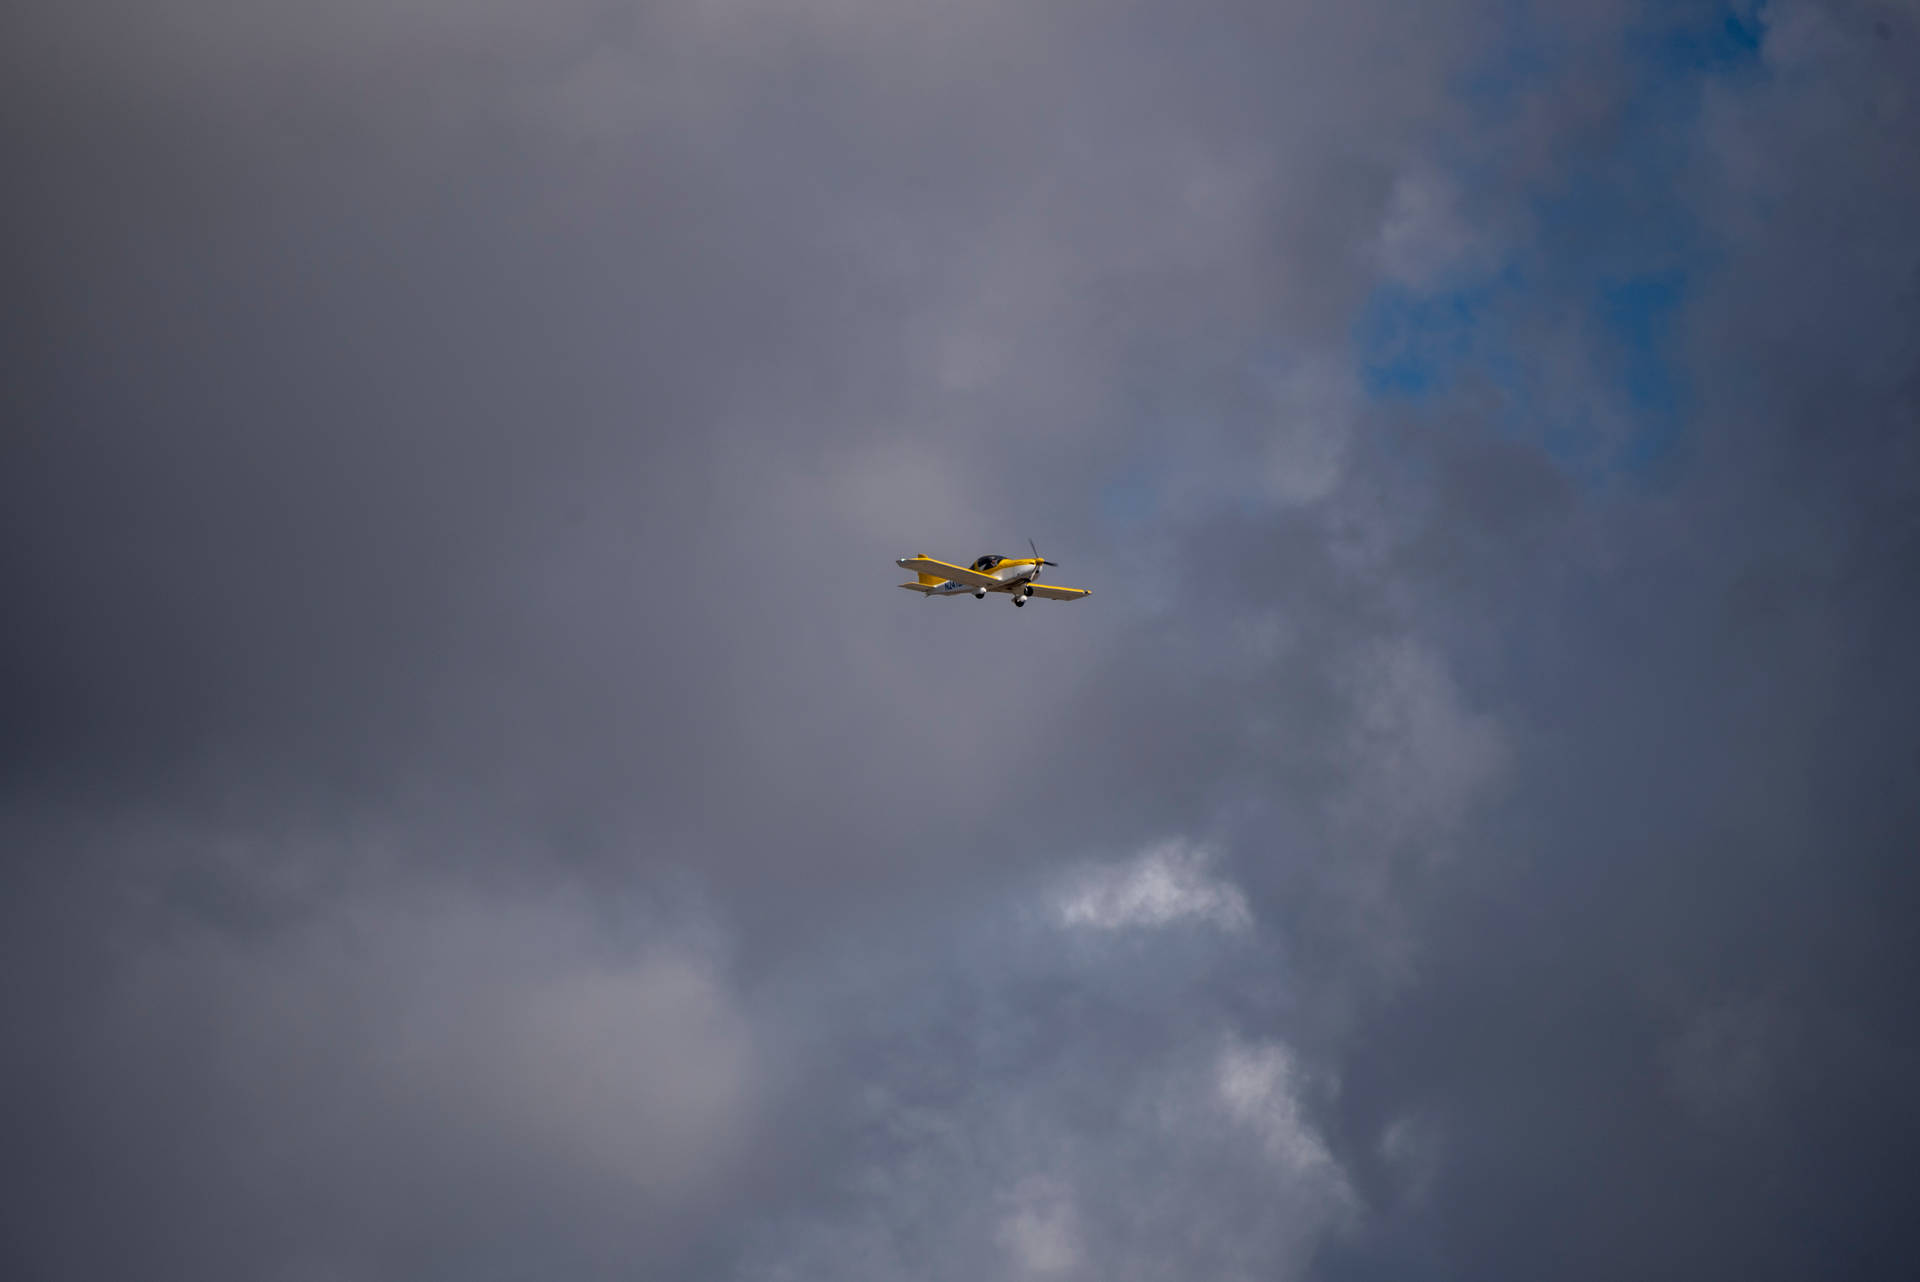 Freedom In The Sky: Small Yellow Plane Soaring High